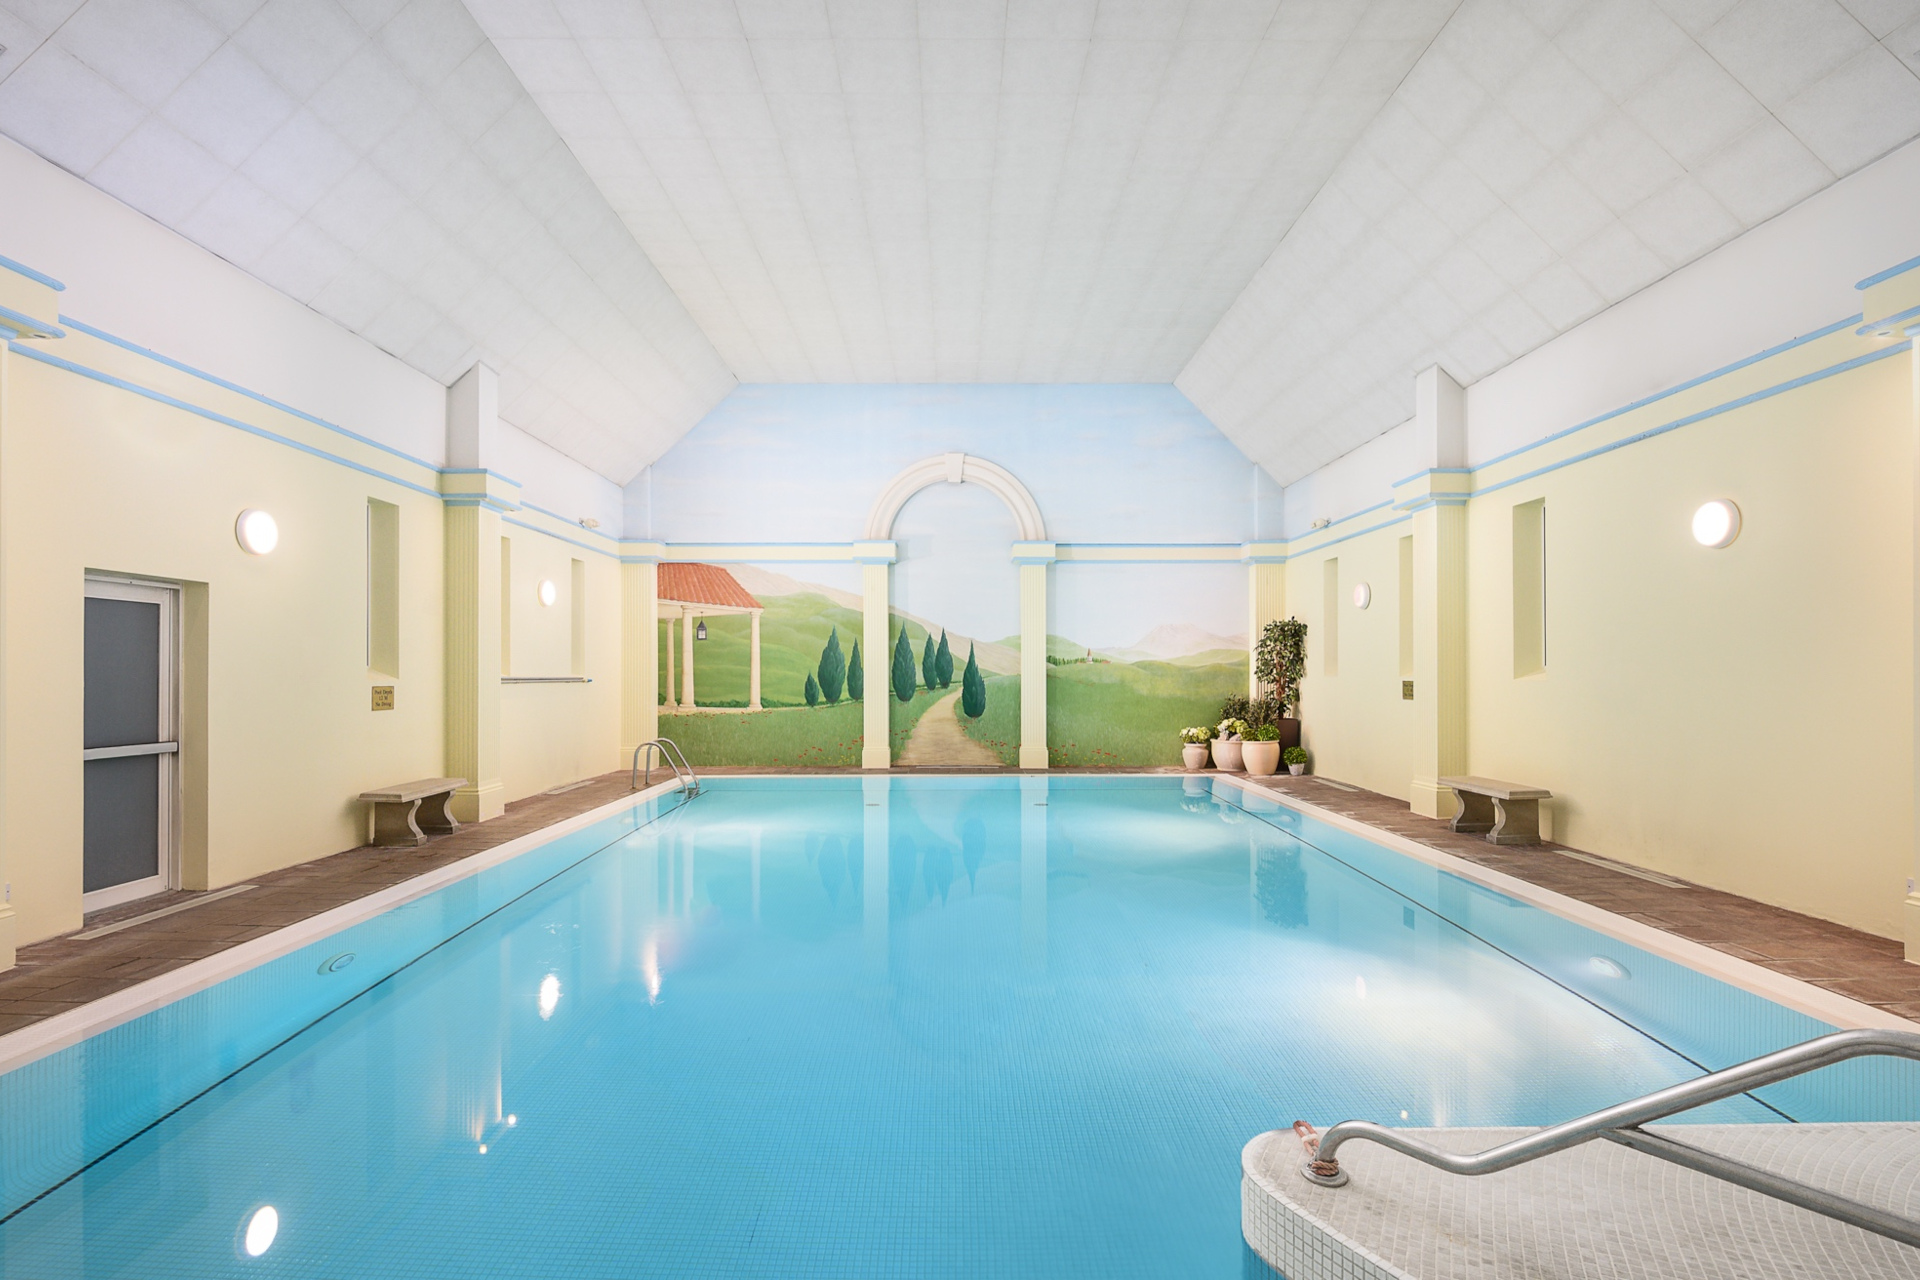 Indoor pool with painted walls